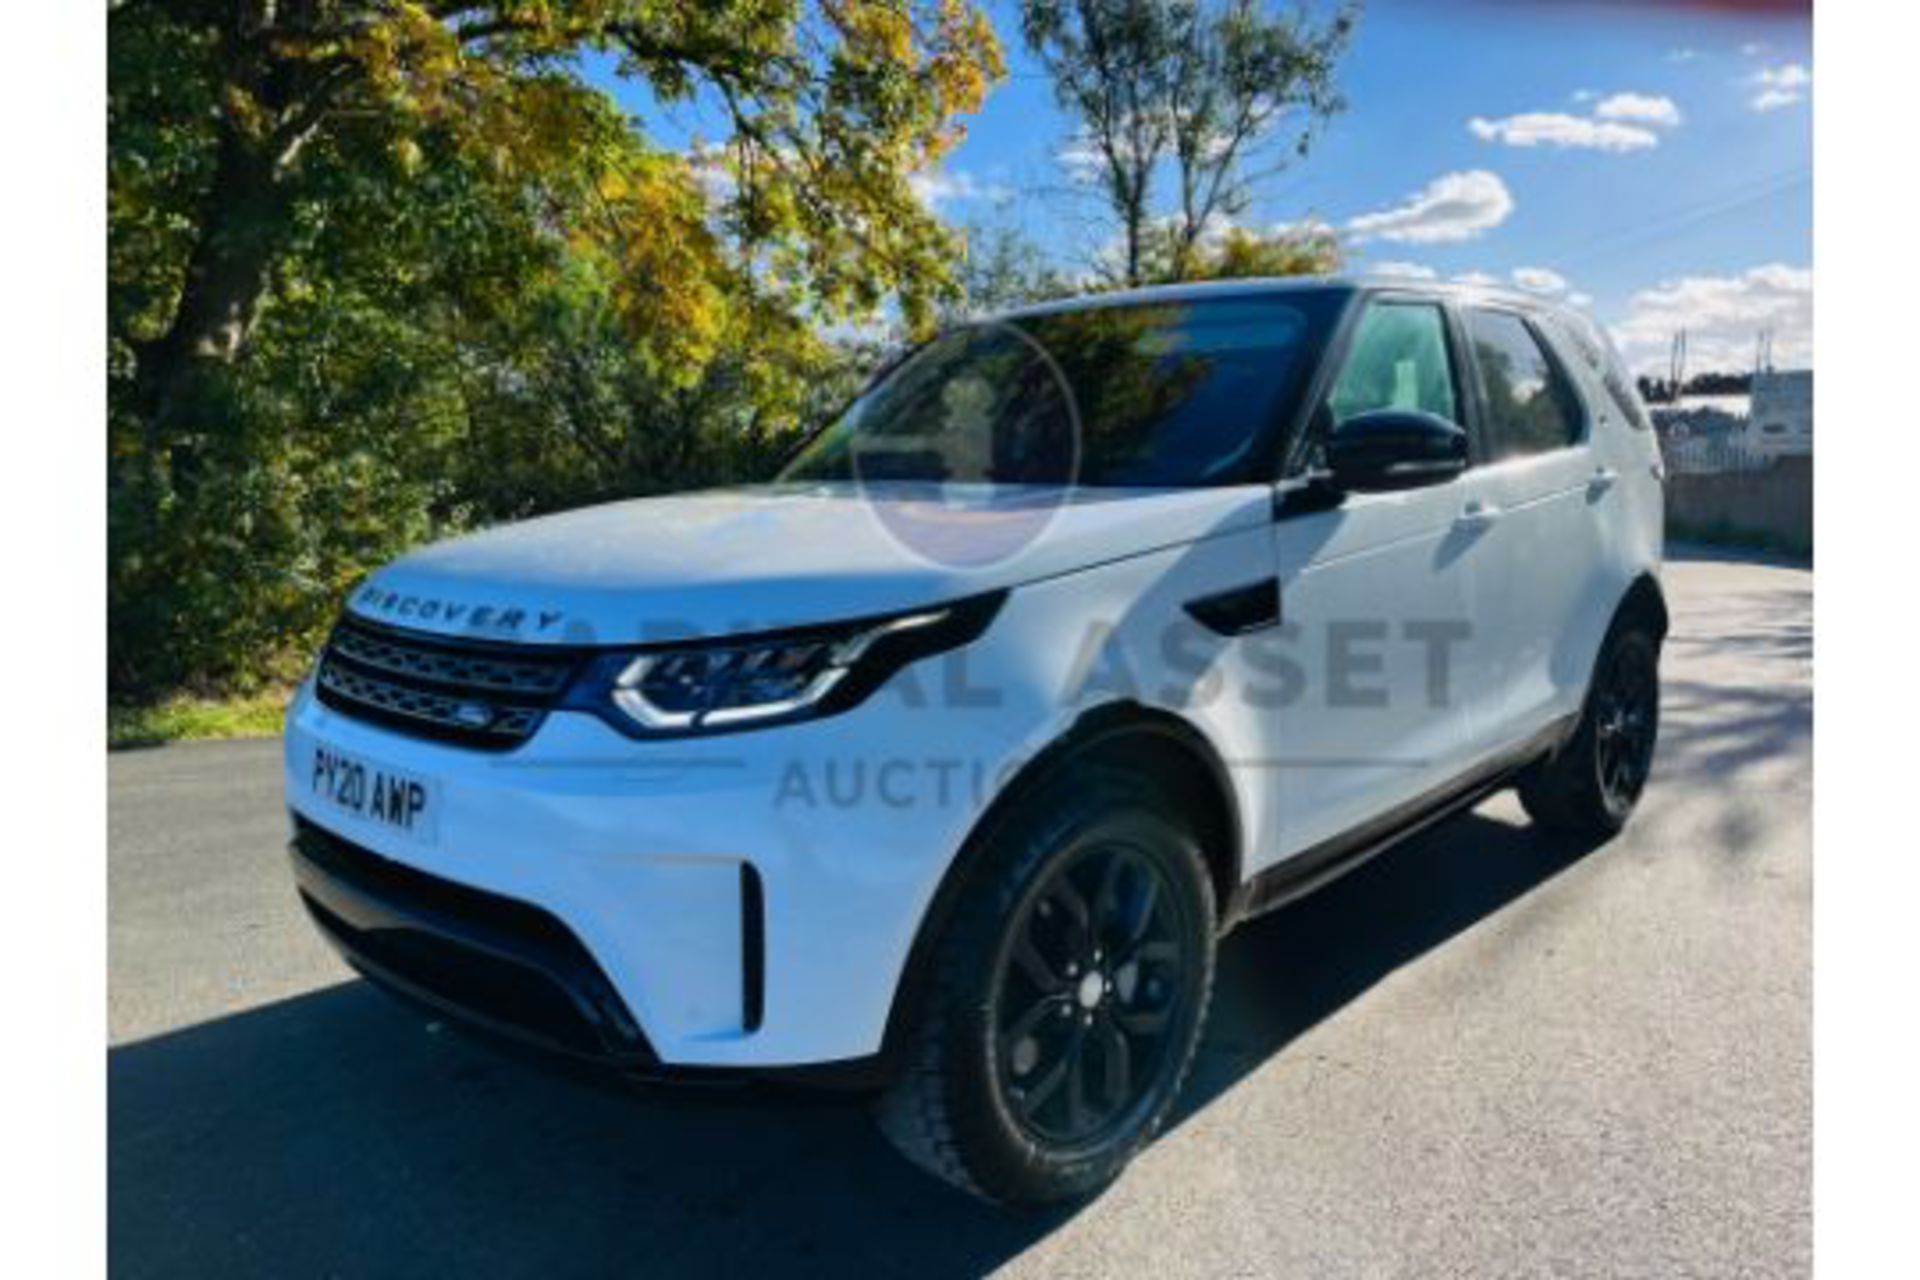 (ON SALE) LAND ROVER DISCOVERY 5 "SDV6 3.0" 'AUTO' 20 REG -1 OWNER -LEATHER- SAT NAV - NO VAT - Image 2 of 36